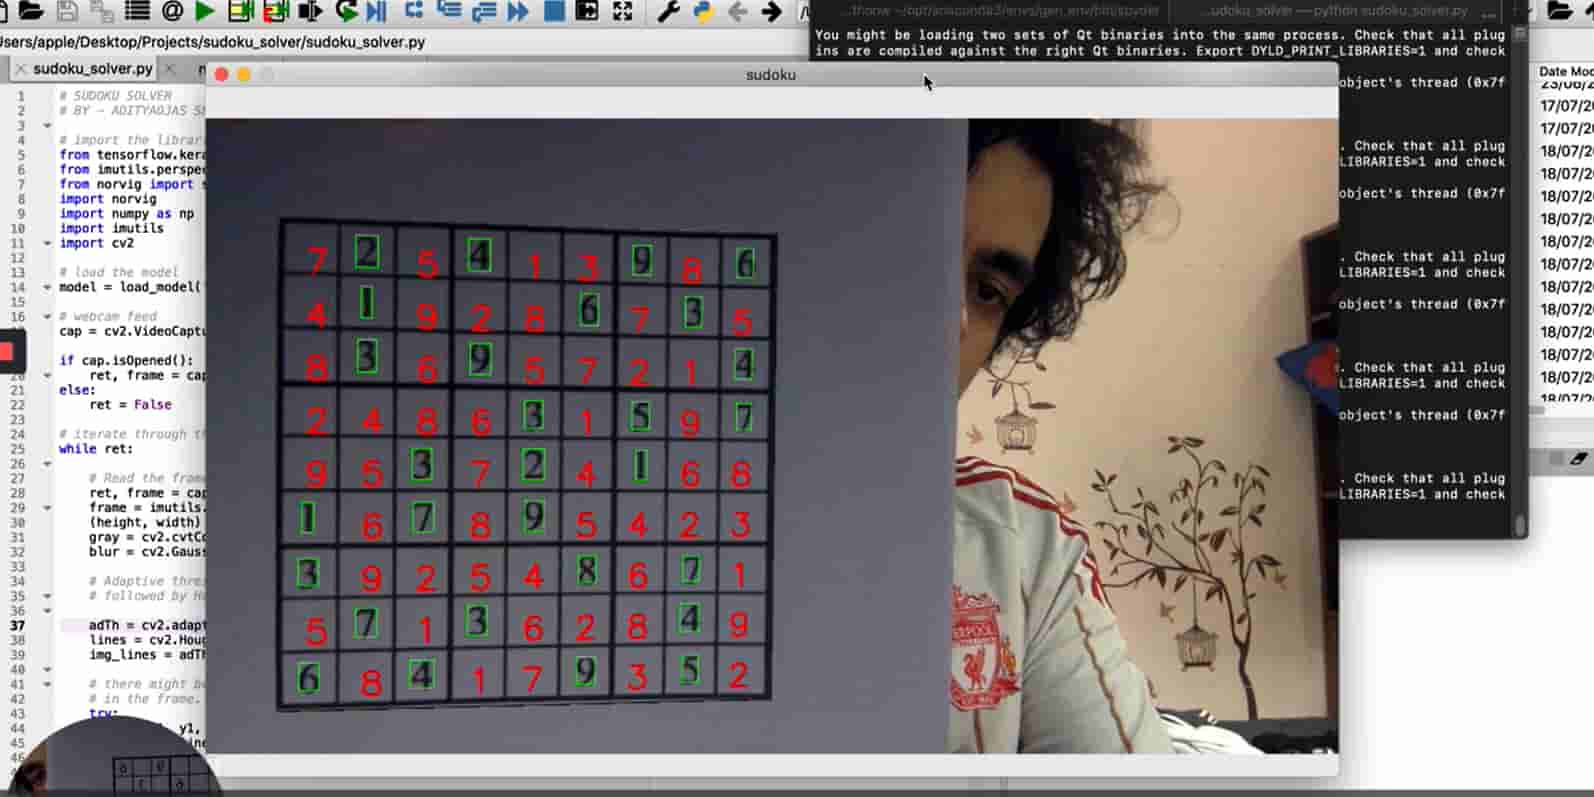 Build A Real-Time Sudoku Solver - Machine Learning Project With Source Code